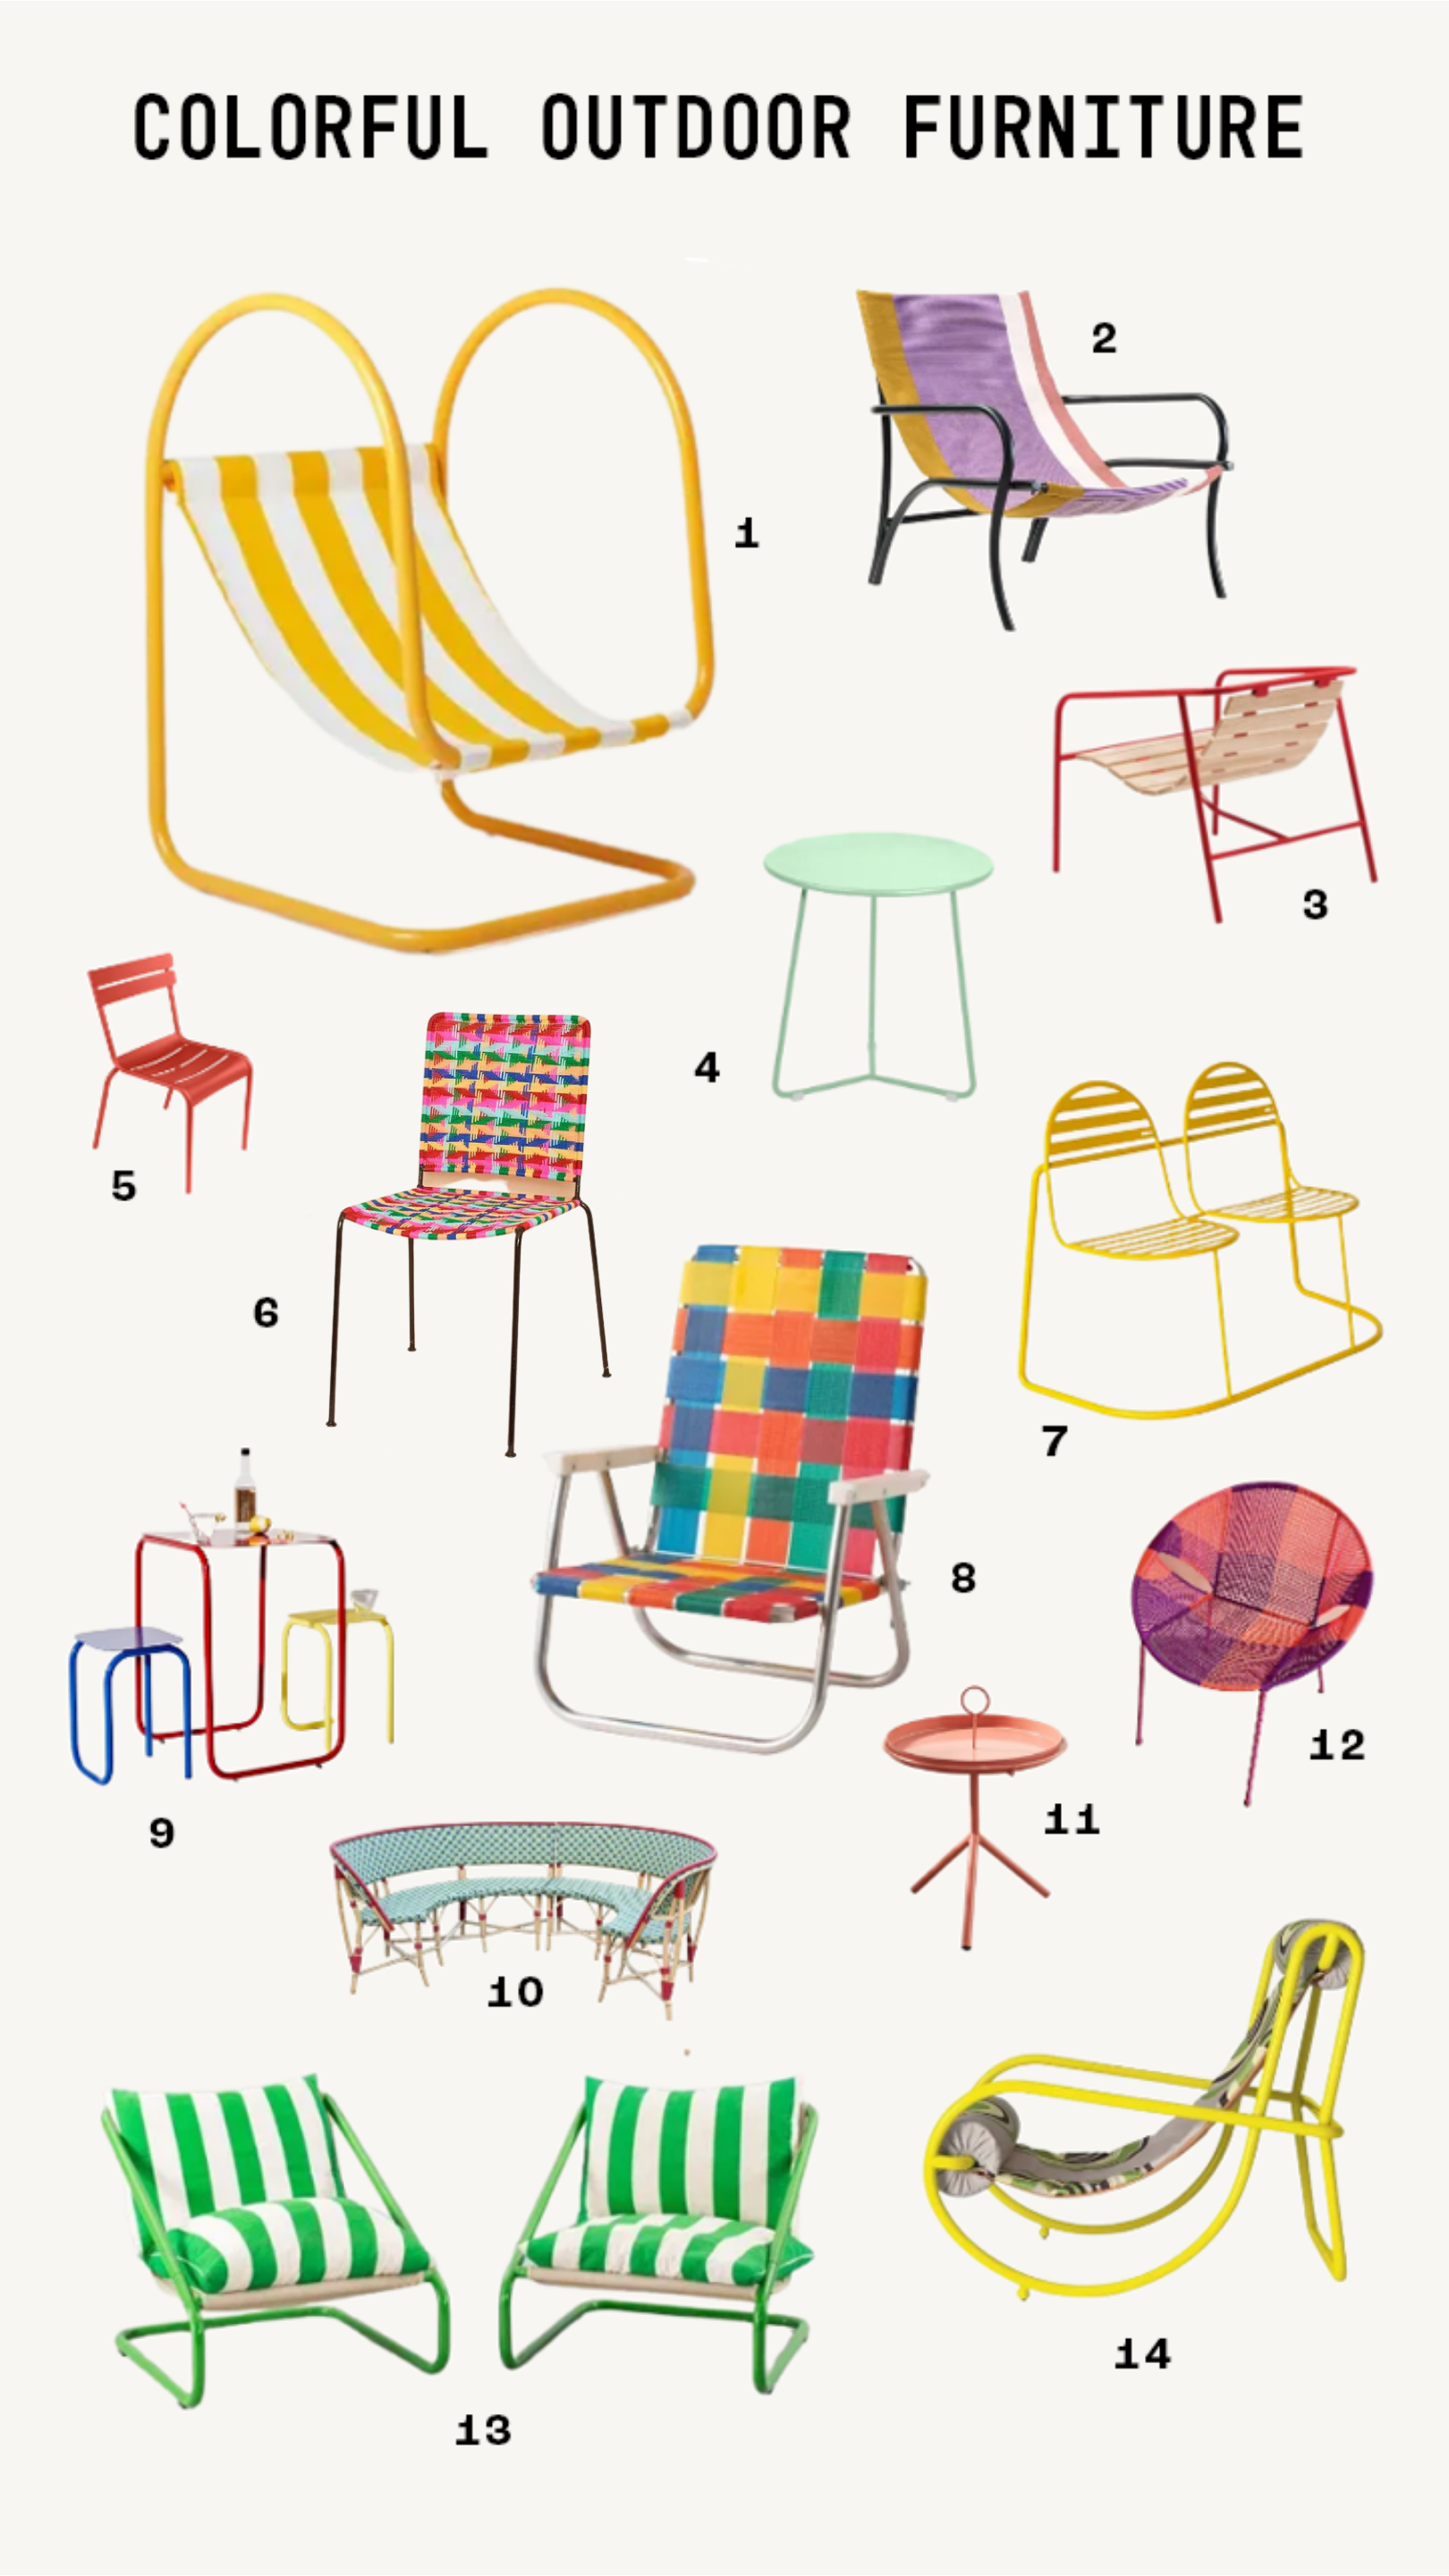 Colorful Outdoor Furniture Pieces to Bring Joy to Your Yard